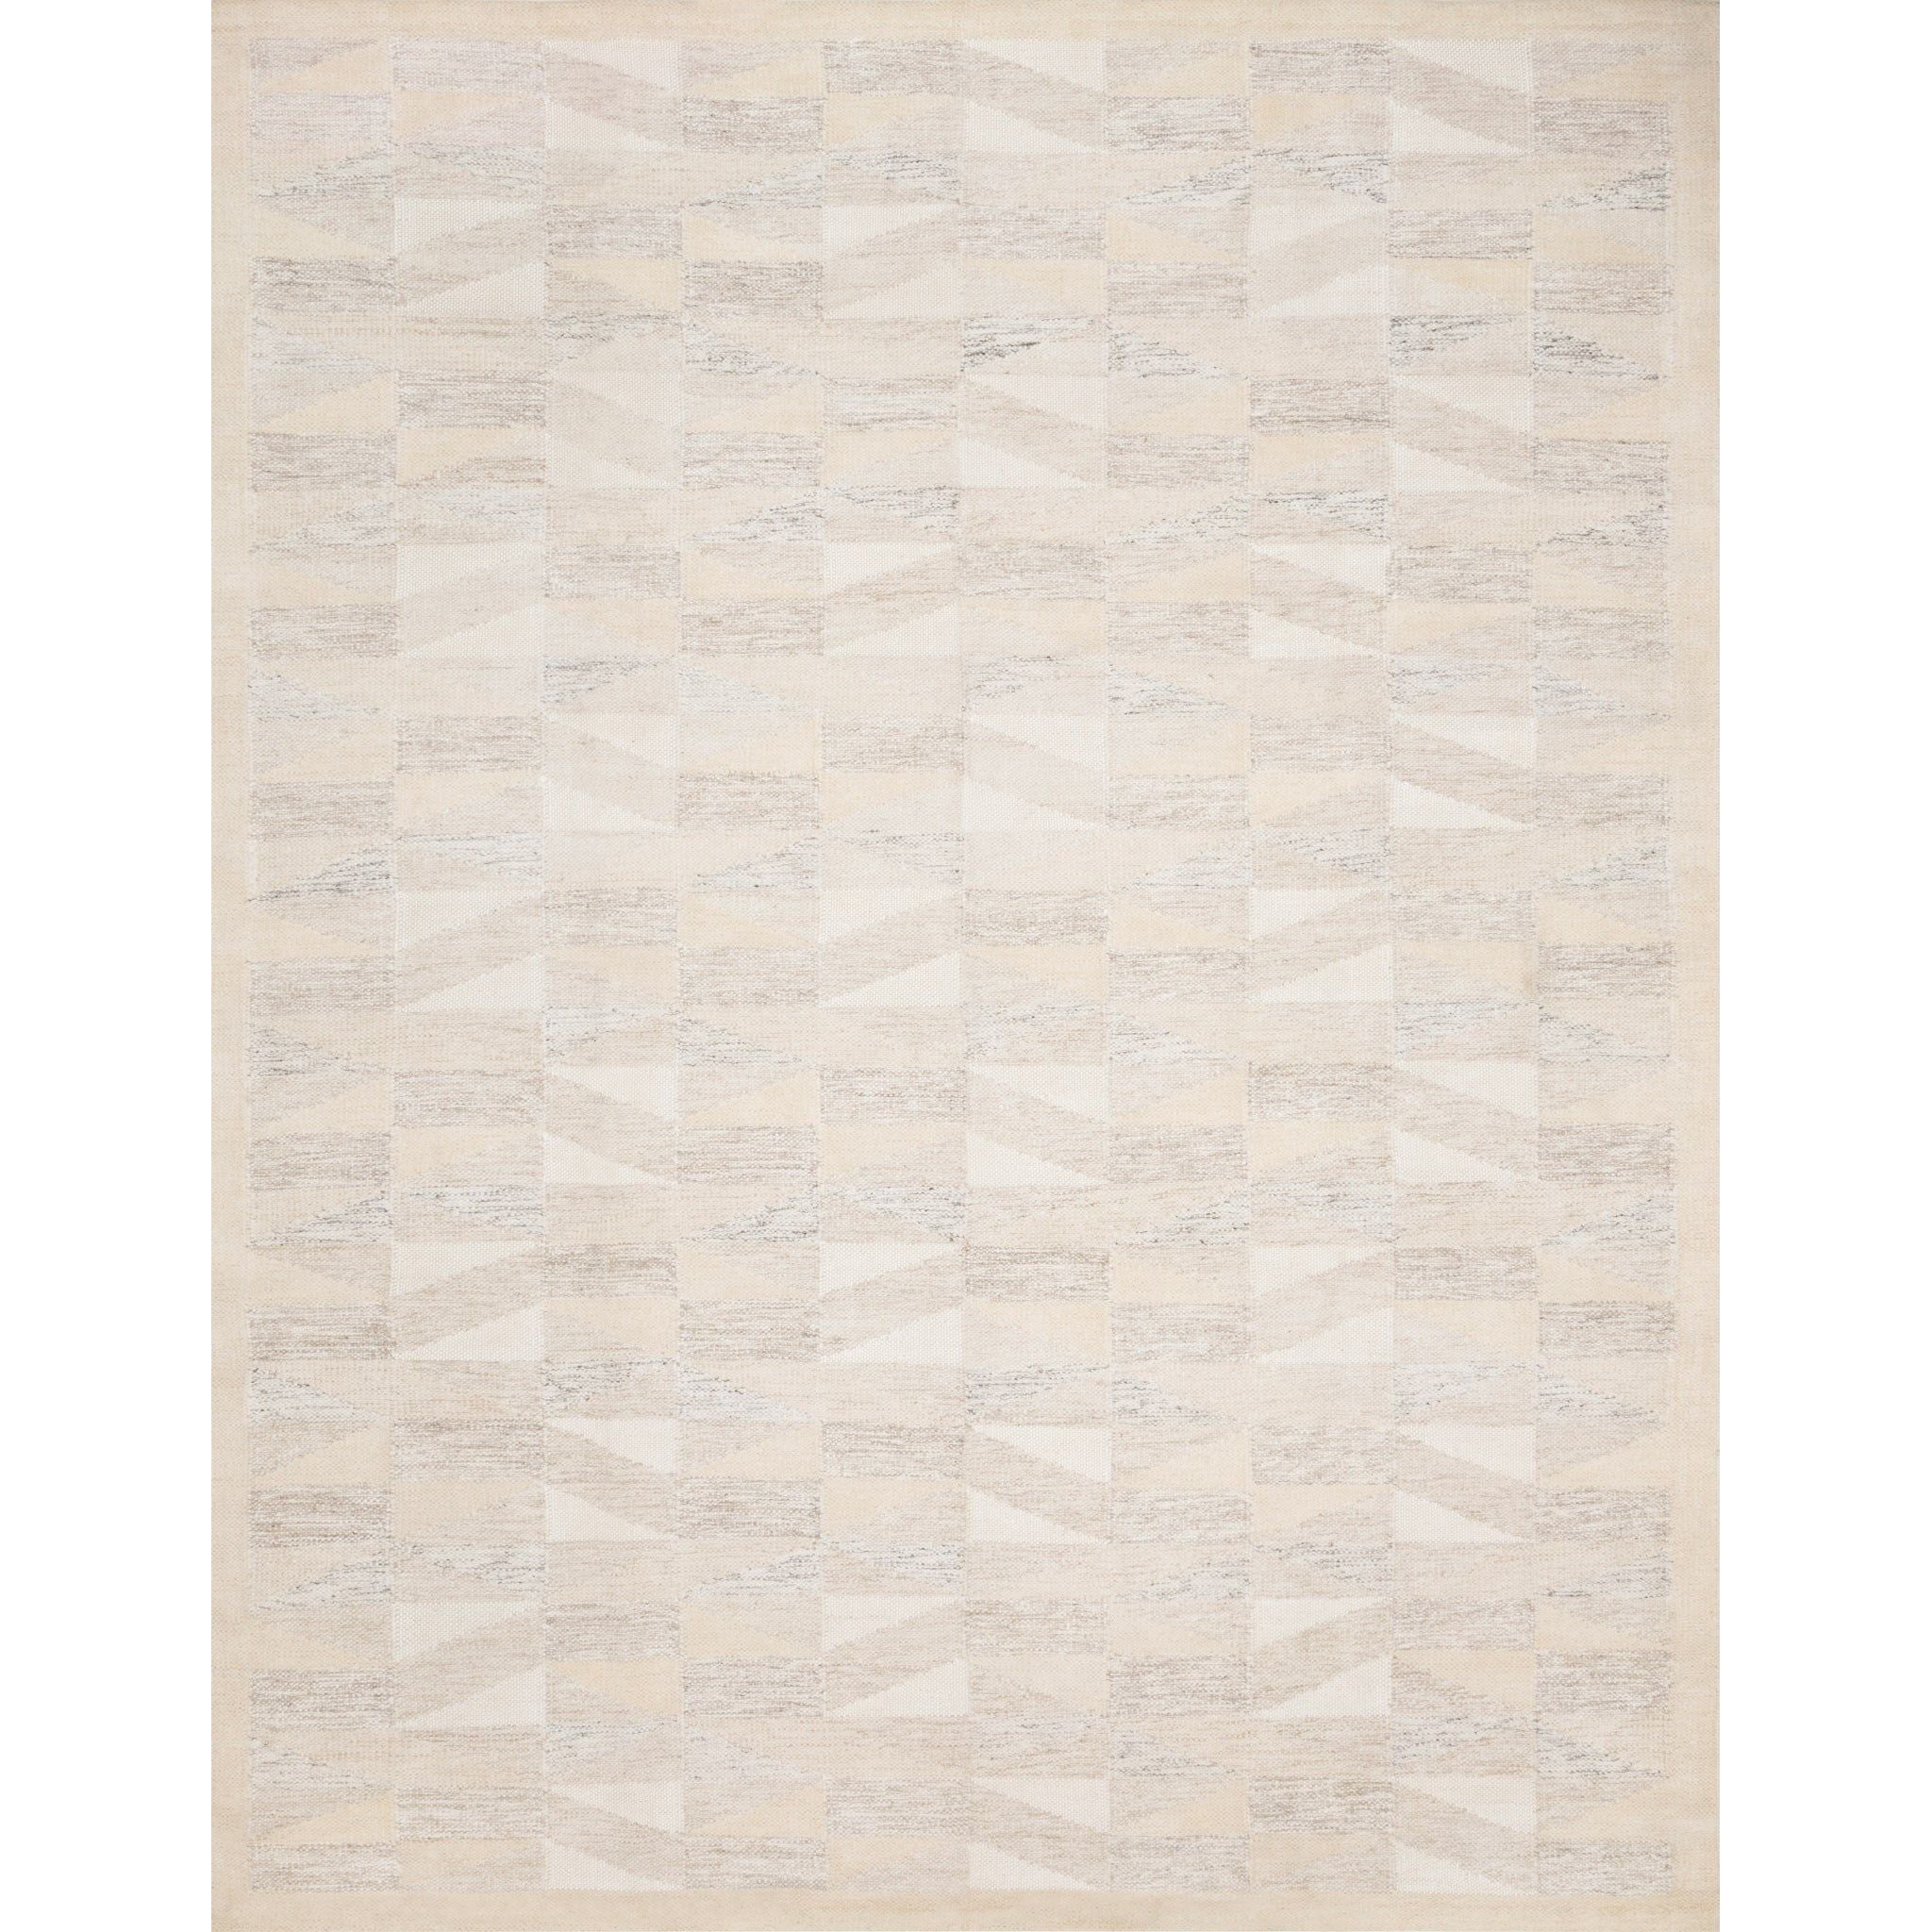 Evelina Natural Rug - Amethyst Home Hand-woven in India with a luxurious blend of wool, cotton, viscose, viscose from bamboo, chenille, acrylic and linen, this calming collection of contemporary neutral tones will add balance and warmth to any space.